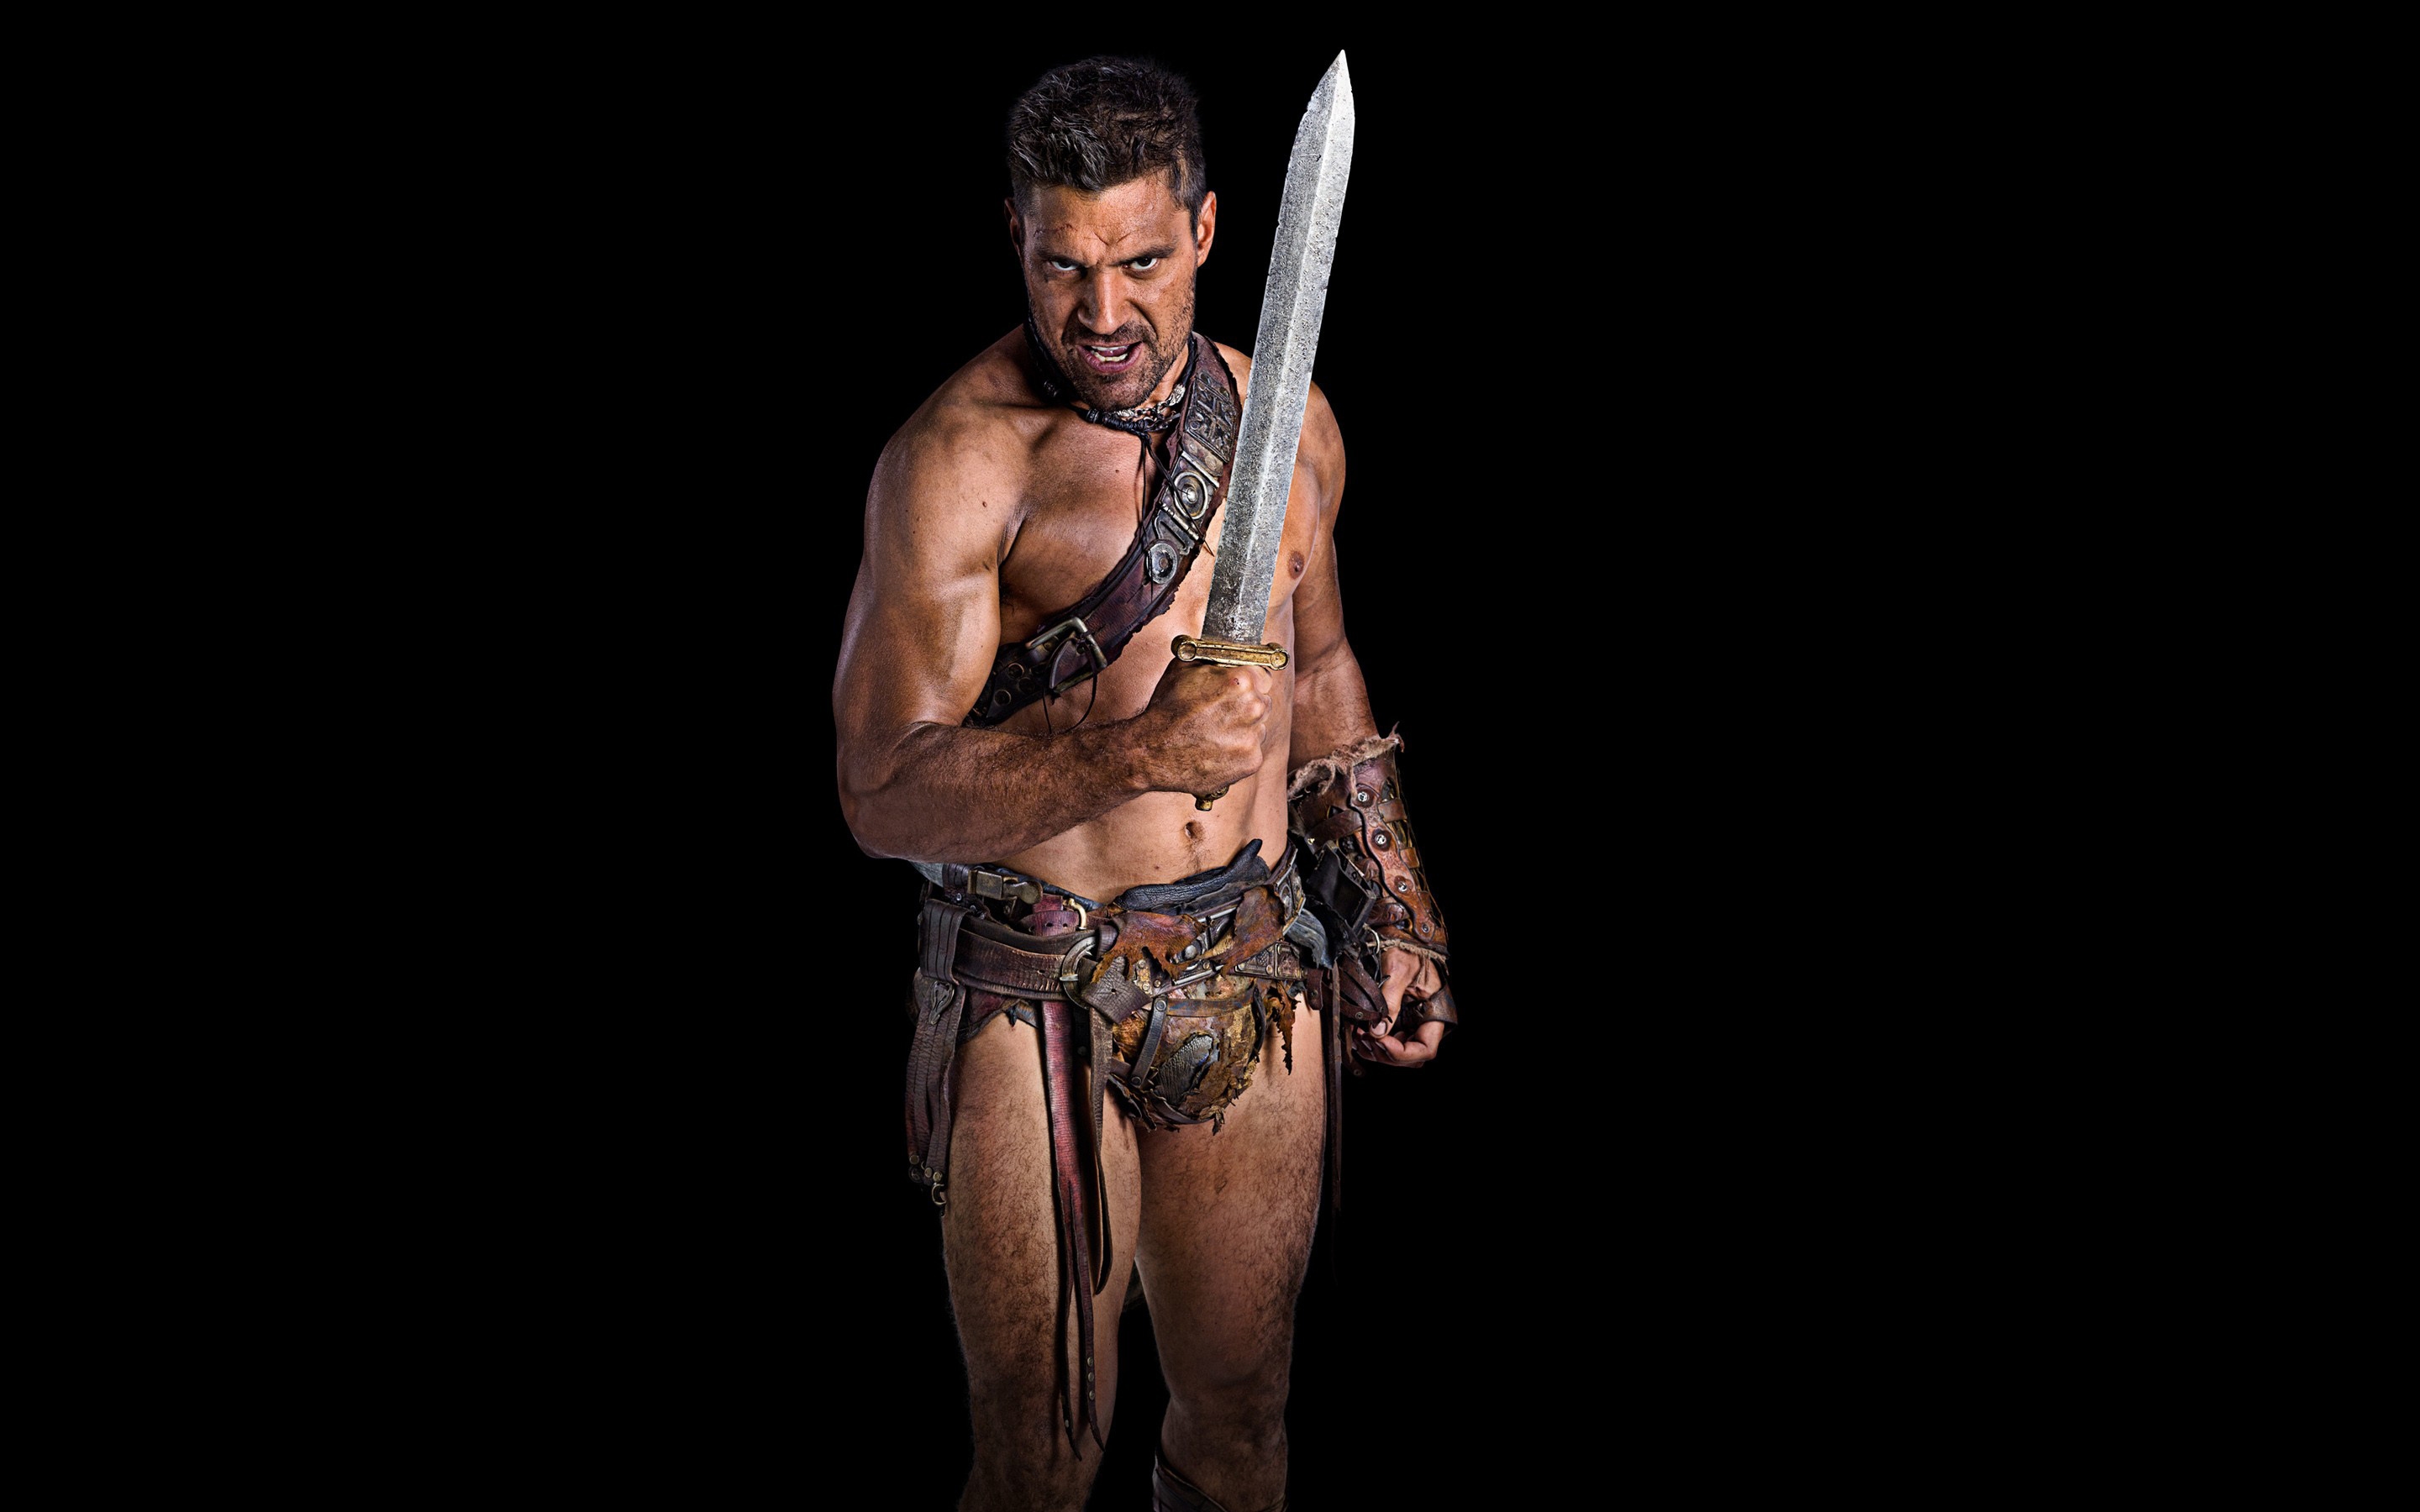 Crixus Spartacus Blood and Sand for 2880 x 1800 Retina Display resolution